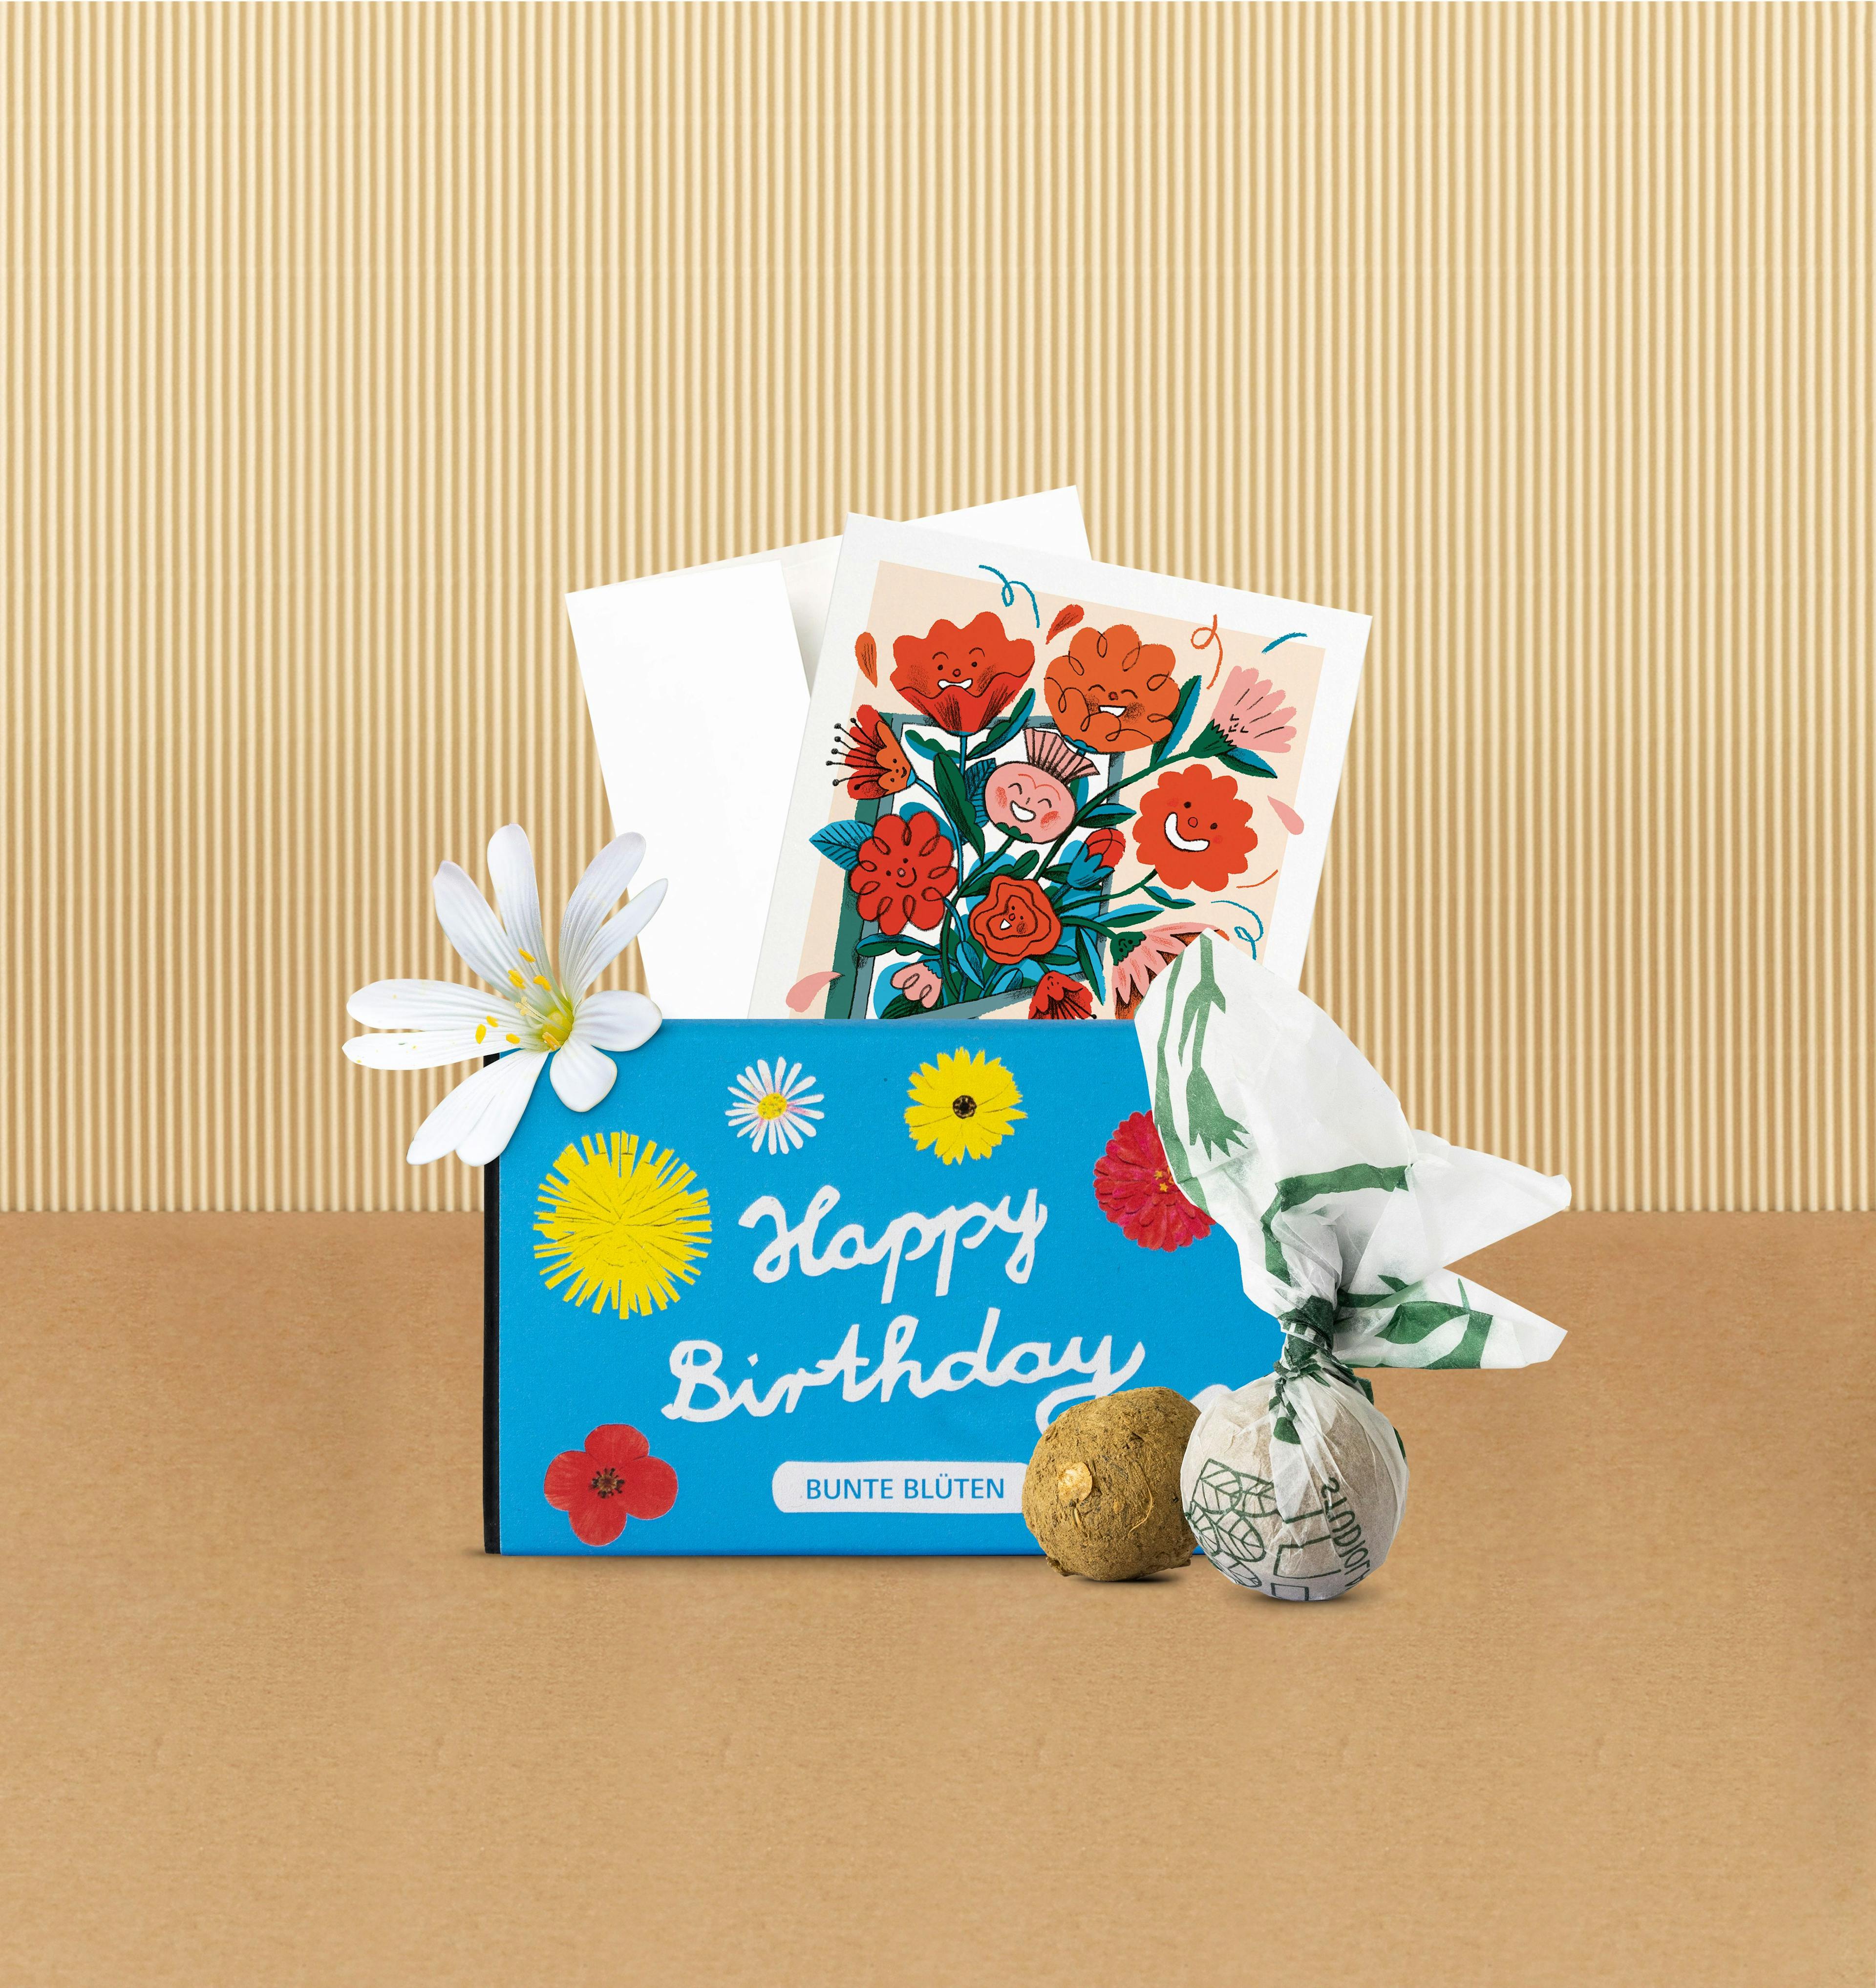 Sustainable birthday gifts - flower seeds and greeting card